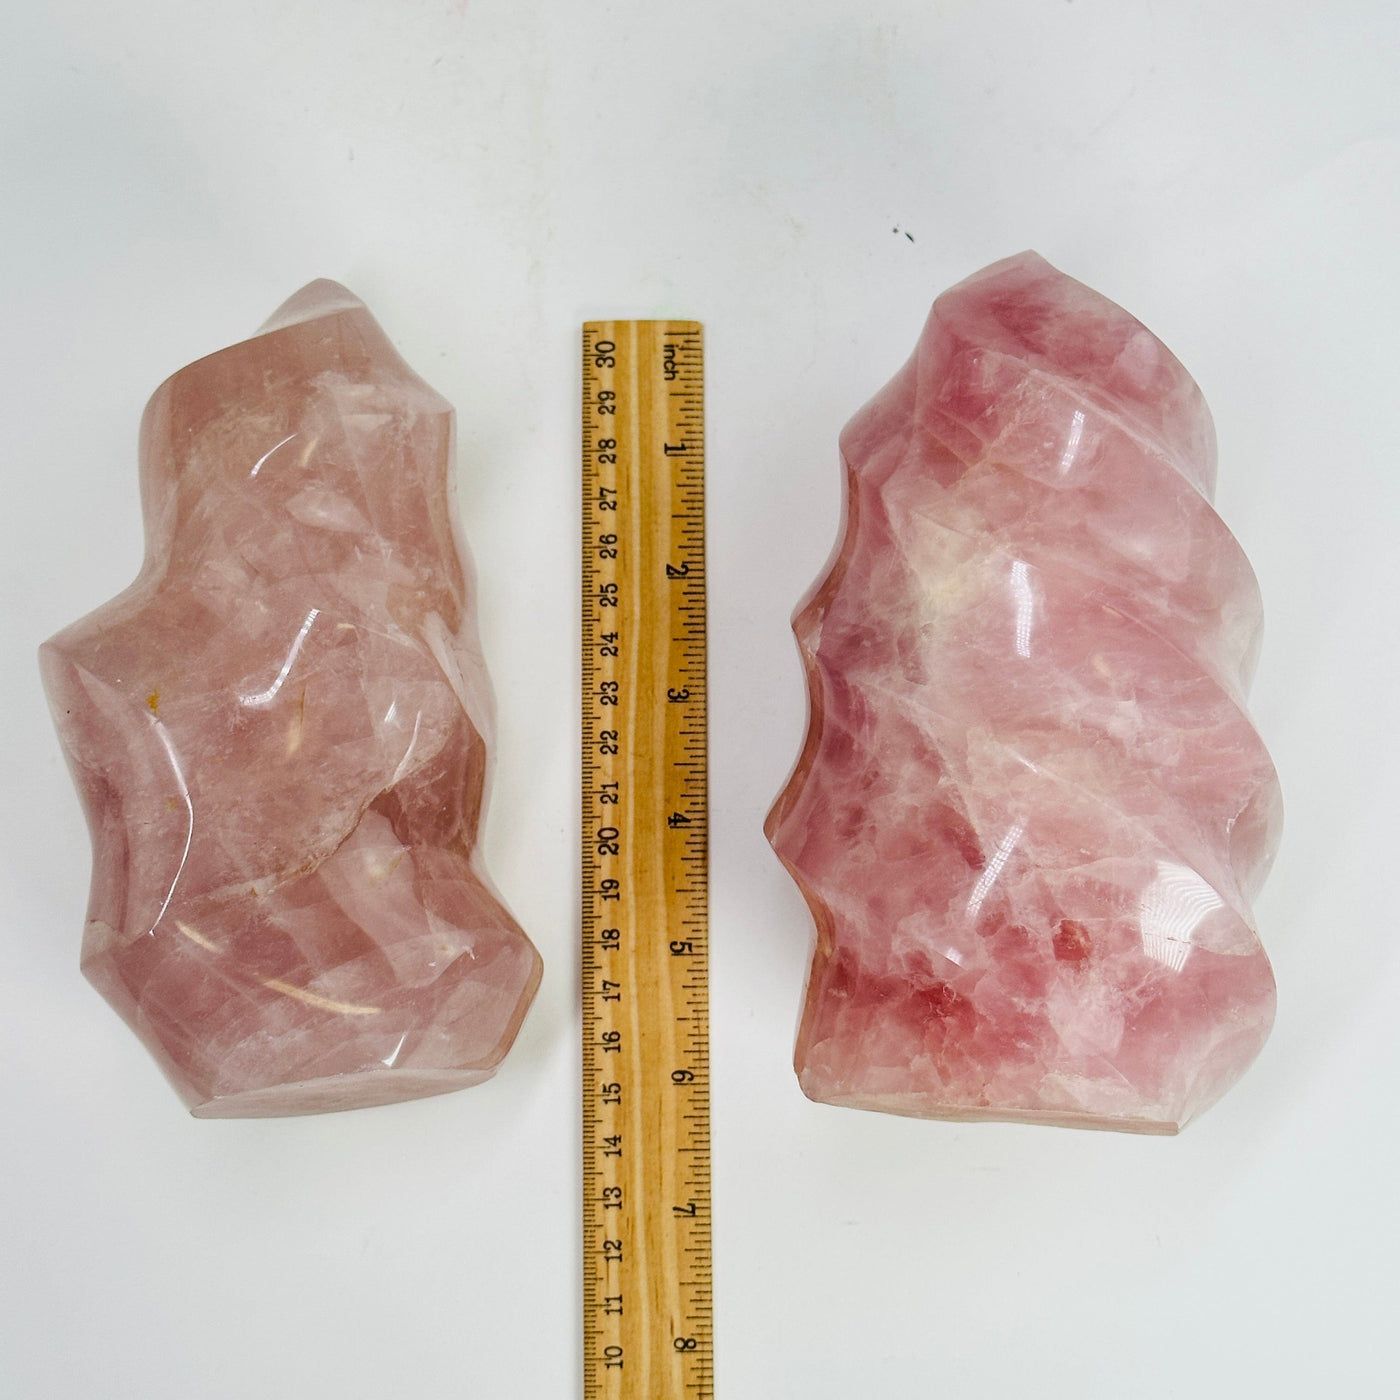 rose quartz flame towers next to a ruler for size reference